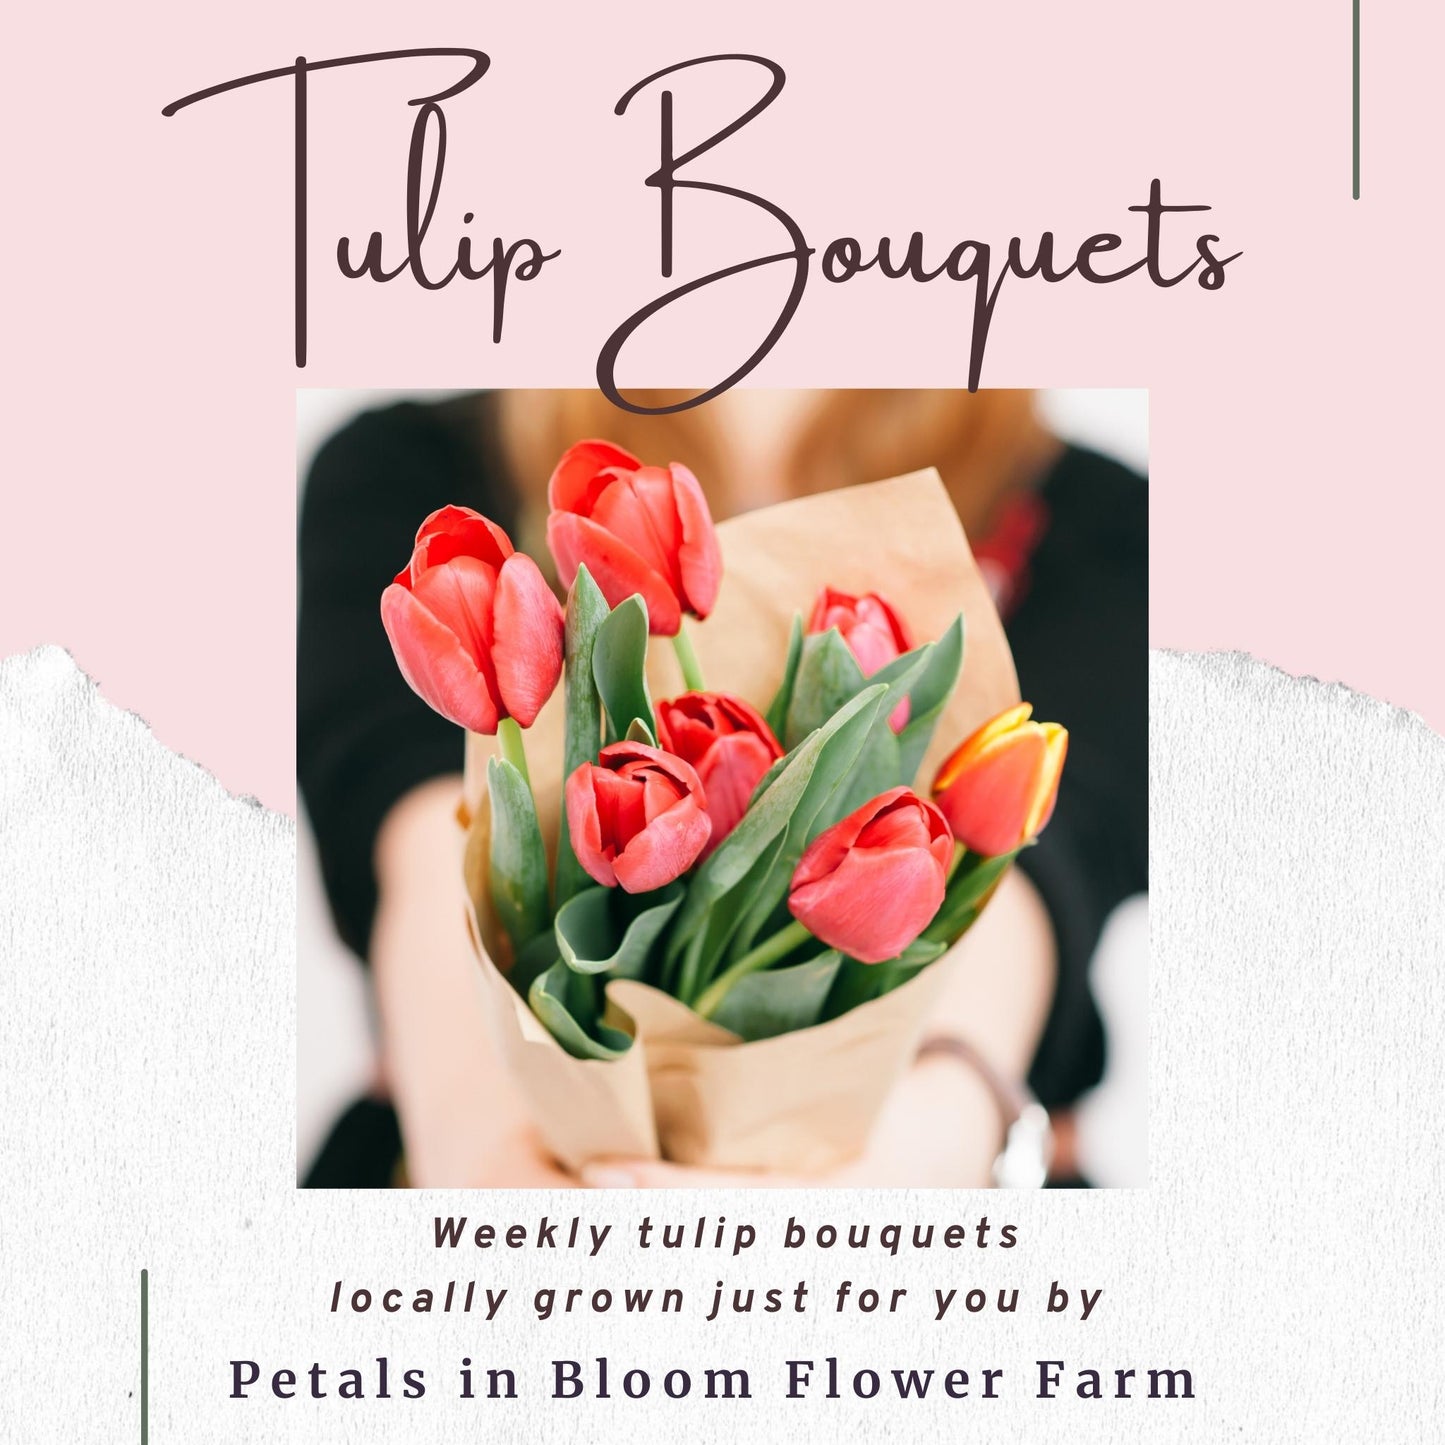 The Sweet Tulips » Send Flower Bouquets